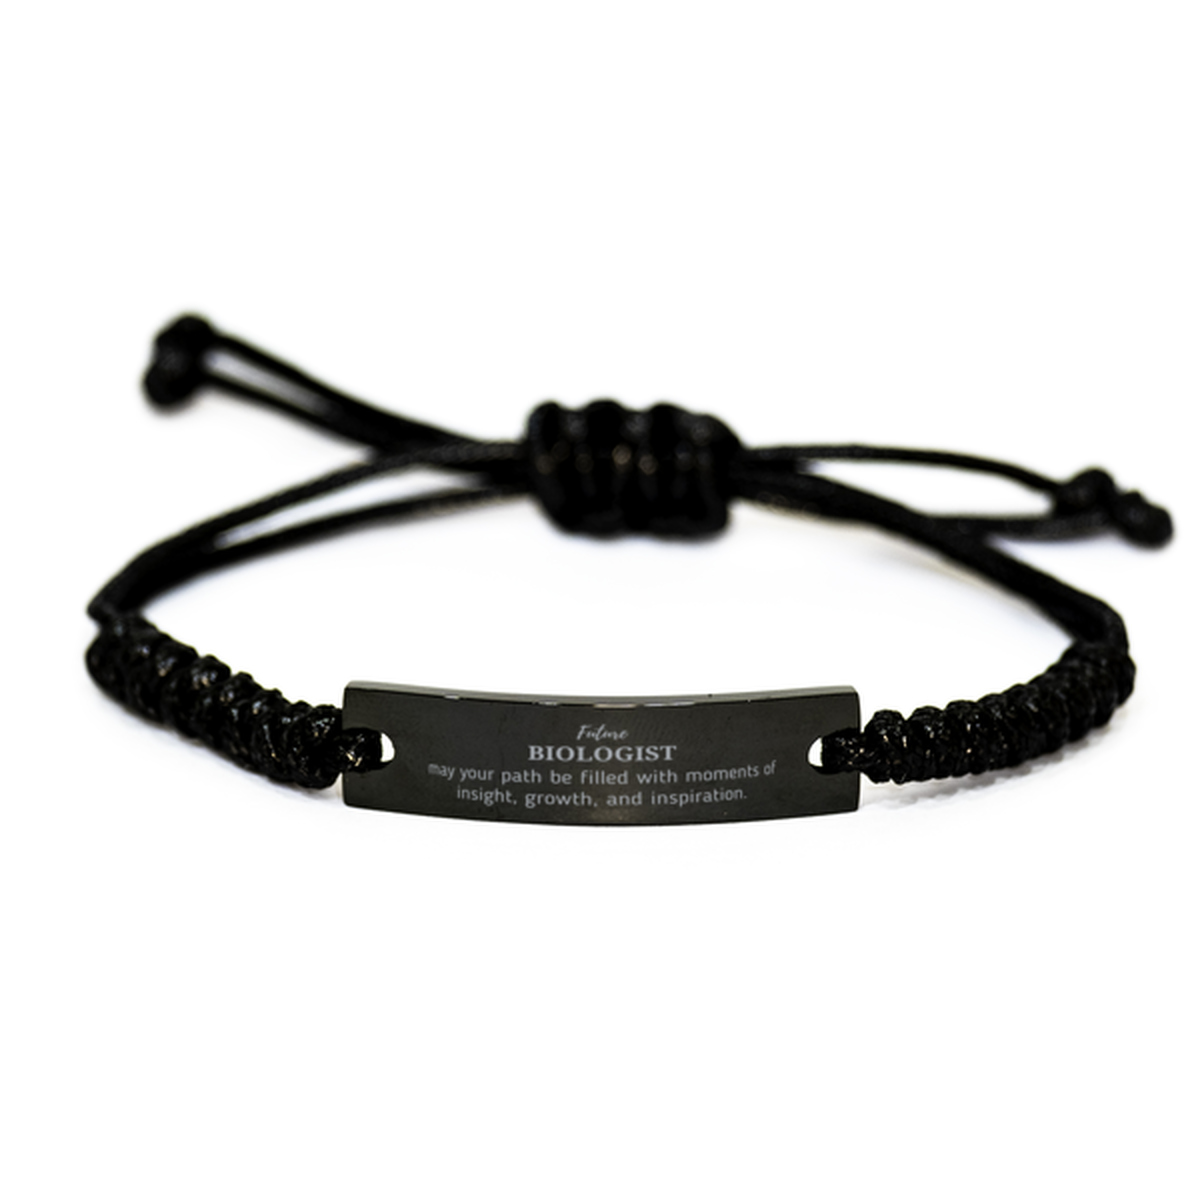 Future Biologist Gifts, May your path be filled with moments of insight, Graduation Gifts for New Biologist, Christmas Unique Black Rope Bracelet For Men, Women, Friends